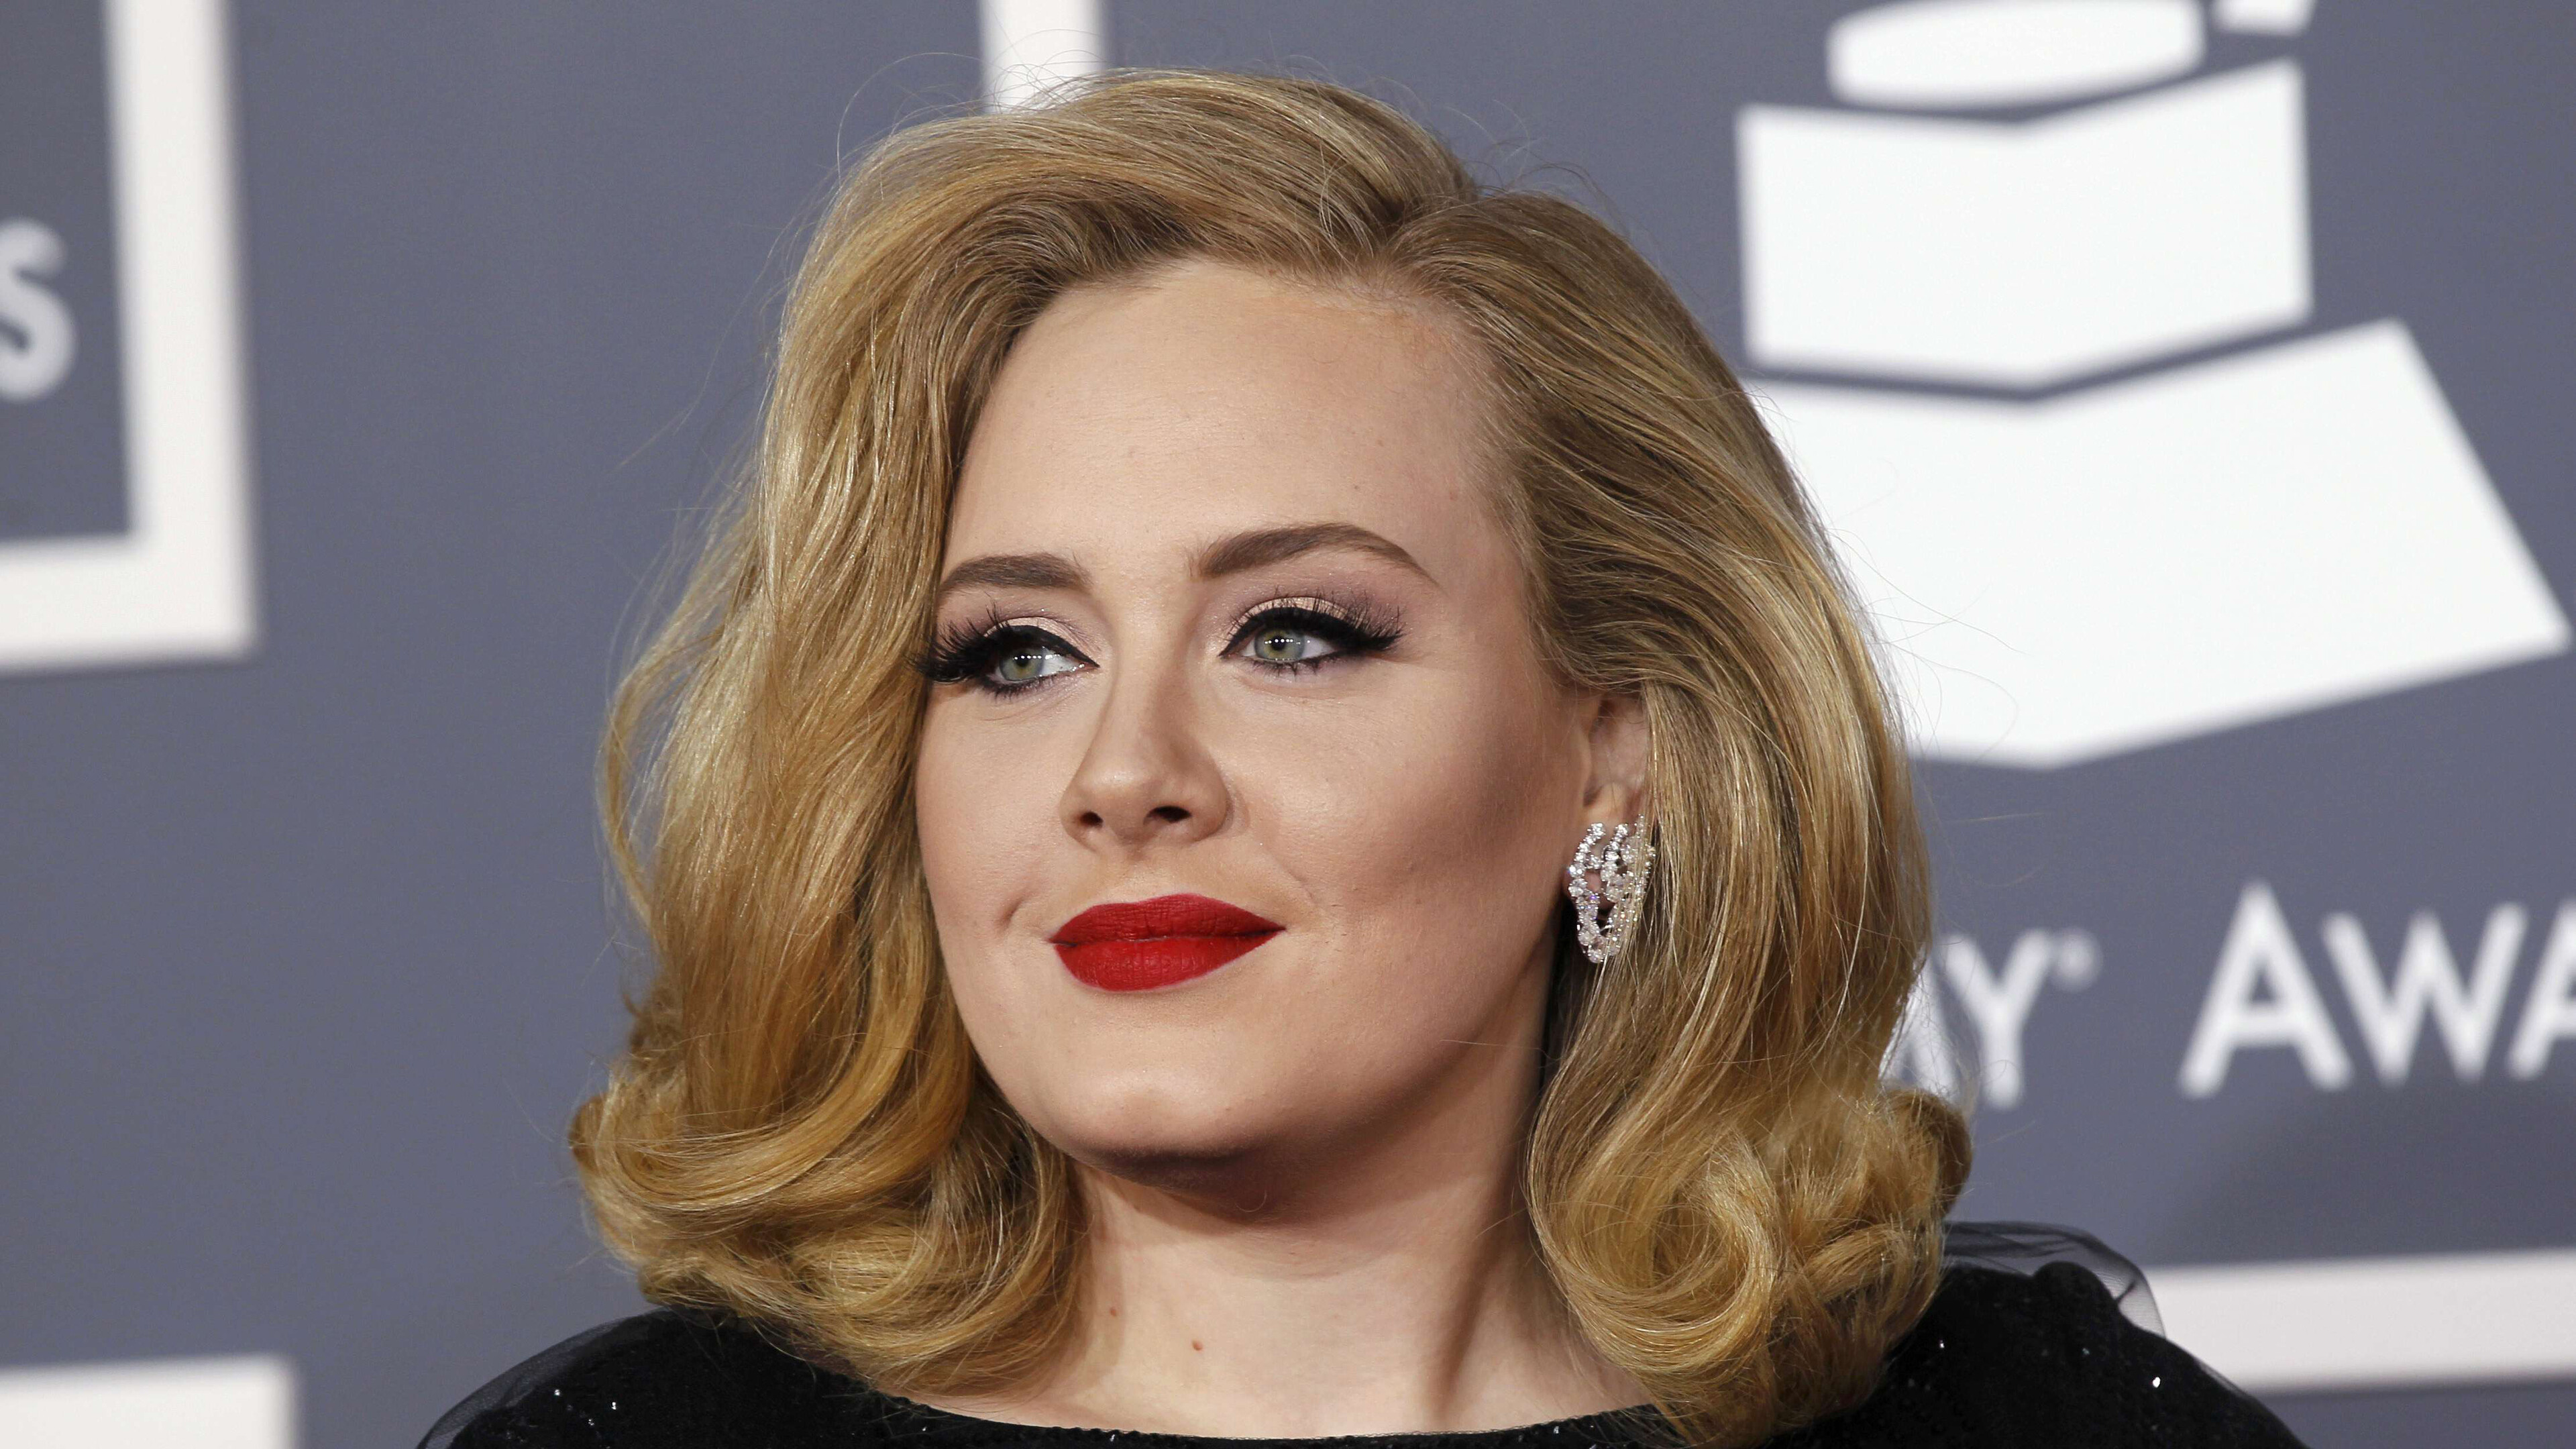 Adele: An English singer and songwriter who rose to fame owing to her distinctive voice. 3840x2160 4K Background.